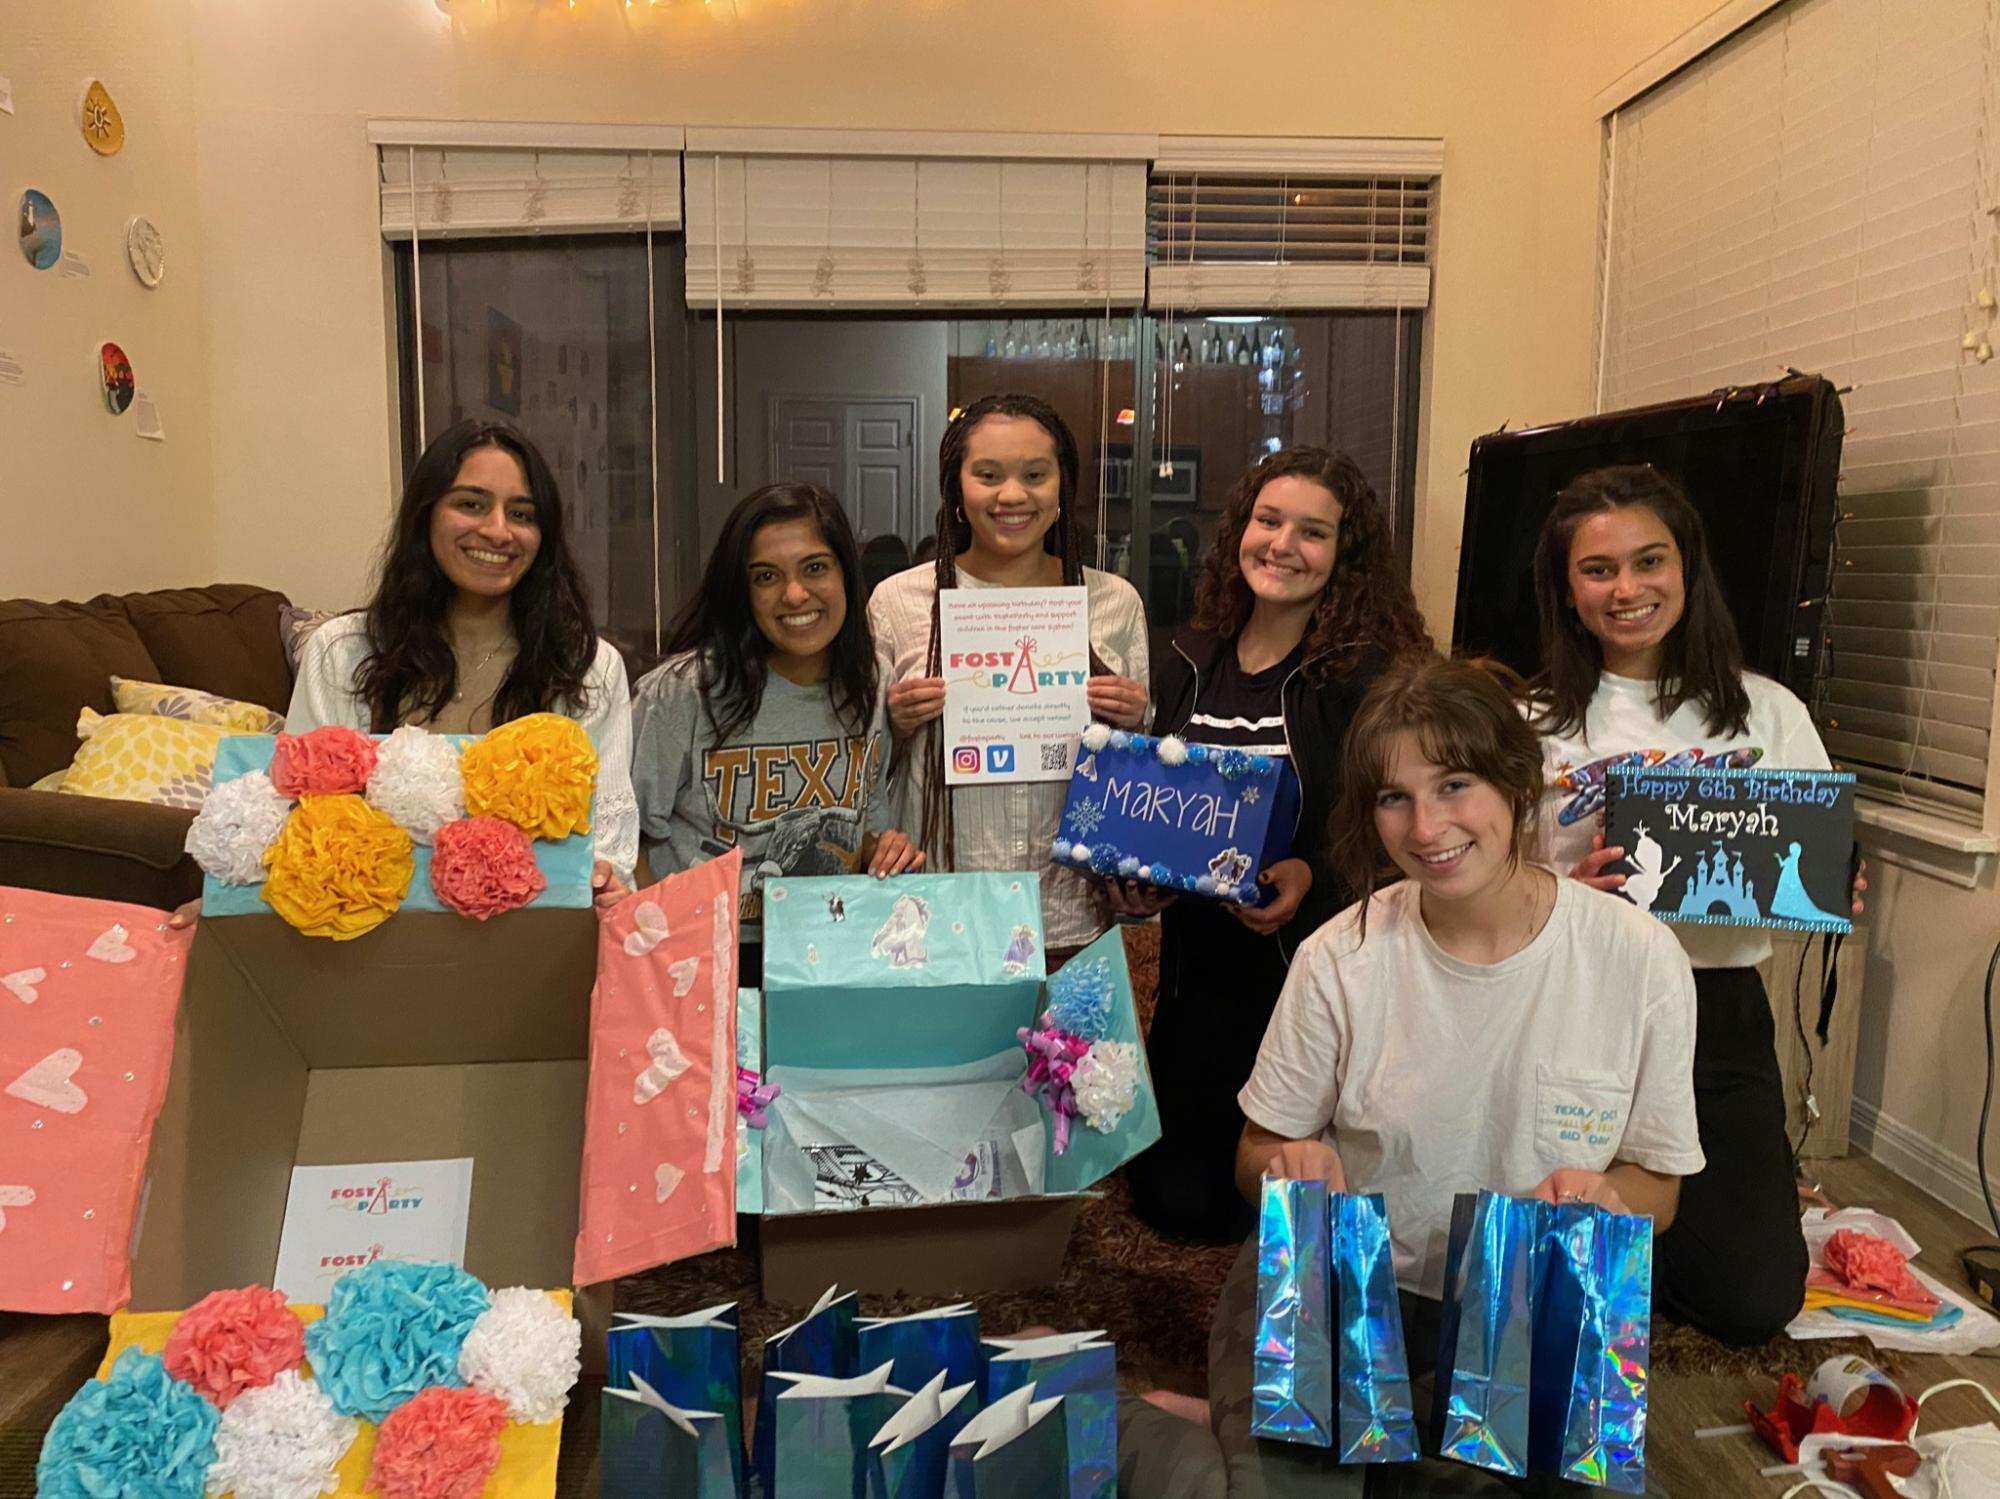 A group of six female college students pose with birthday party kits they created.